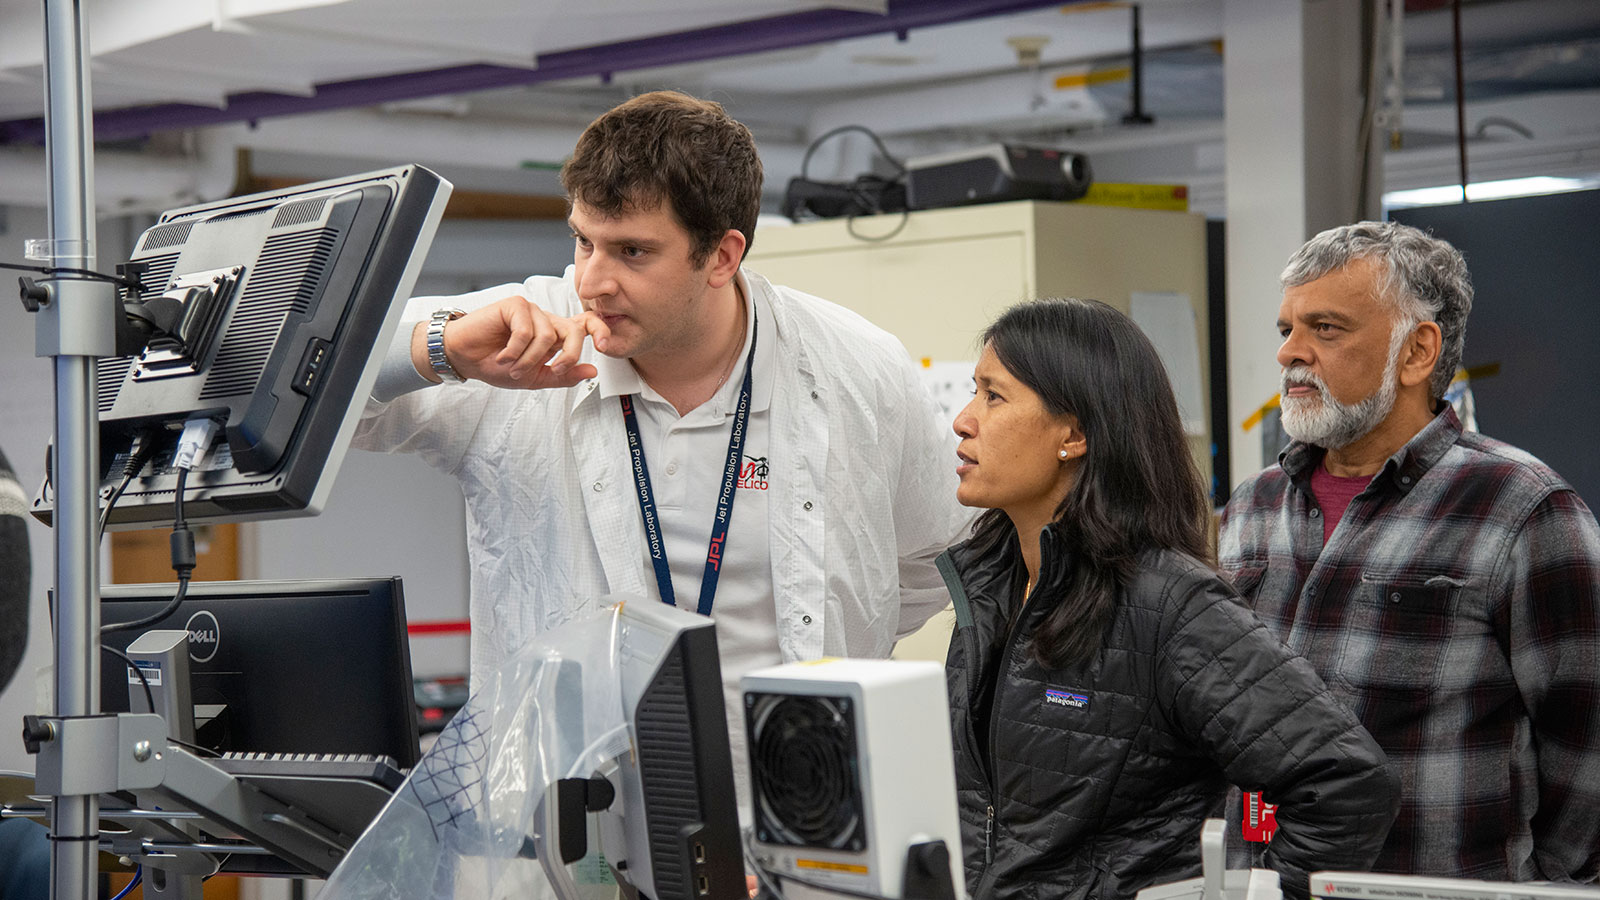 Teddy Tzanetos, MiMi Aung and Bob Balaram of NASA’s Mars Helicopter project observe a flight test.